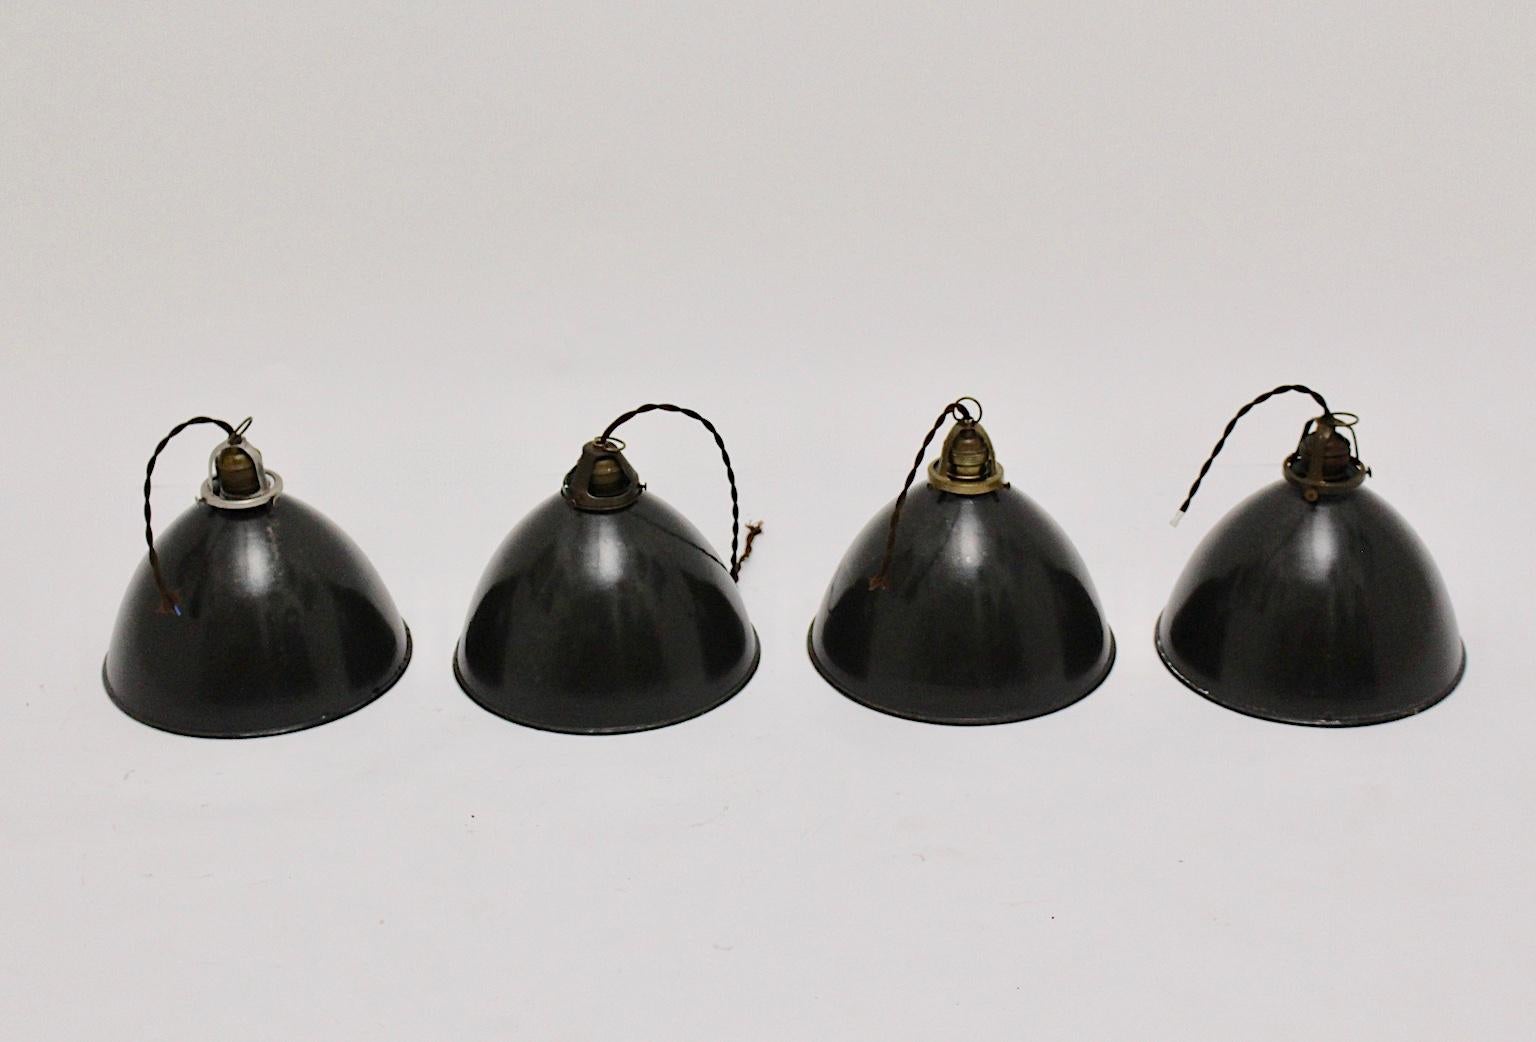 Enameled Bauhaus Black and White Vintage Set of four Email Hanging Lamps, 1920s, Germany For Sale